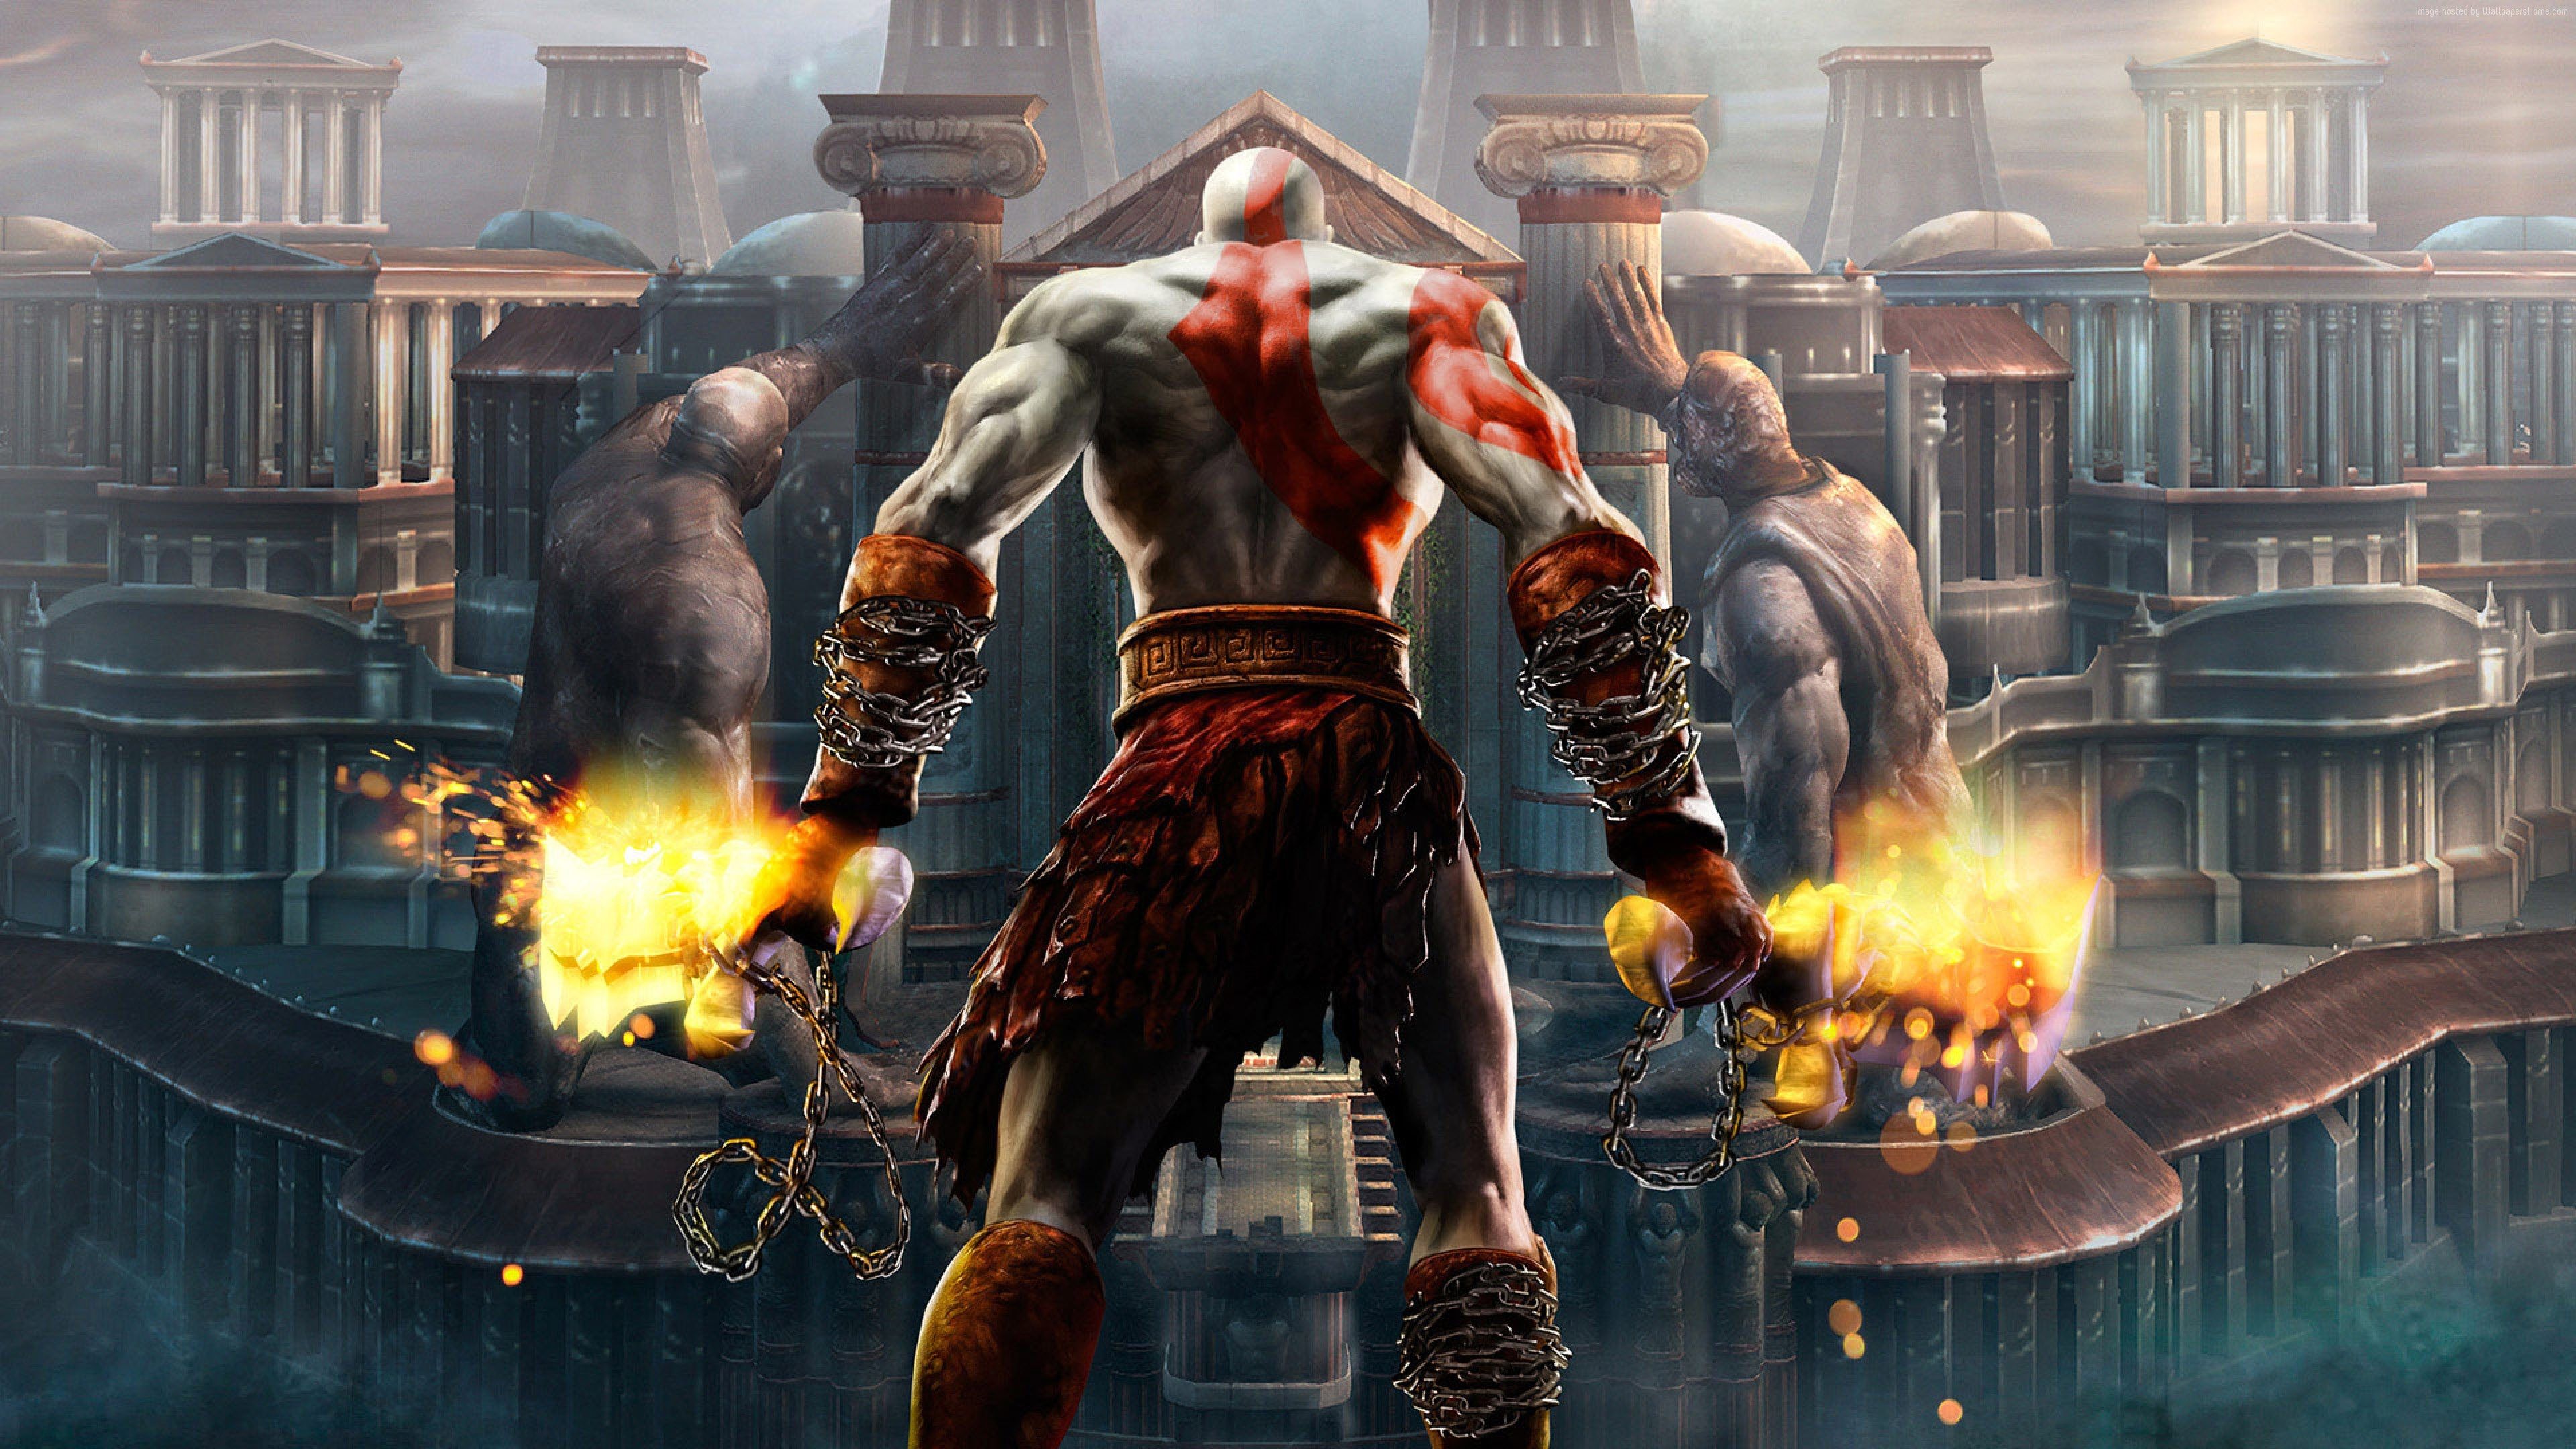 God of War PC Wallpapers - Top Free God of War PC Backgrounds